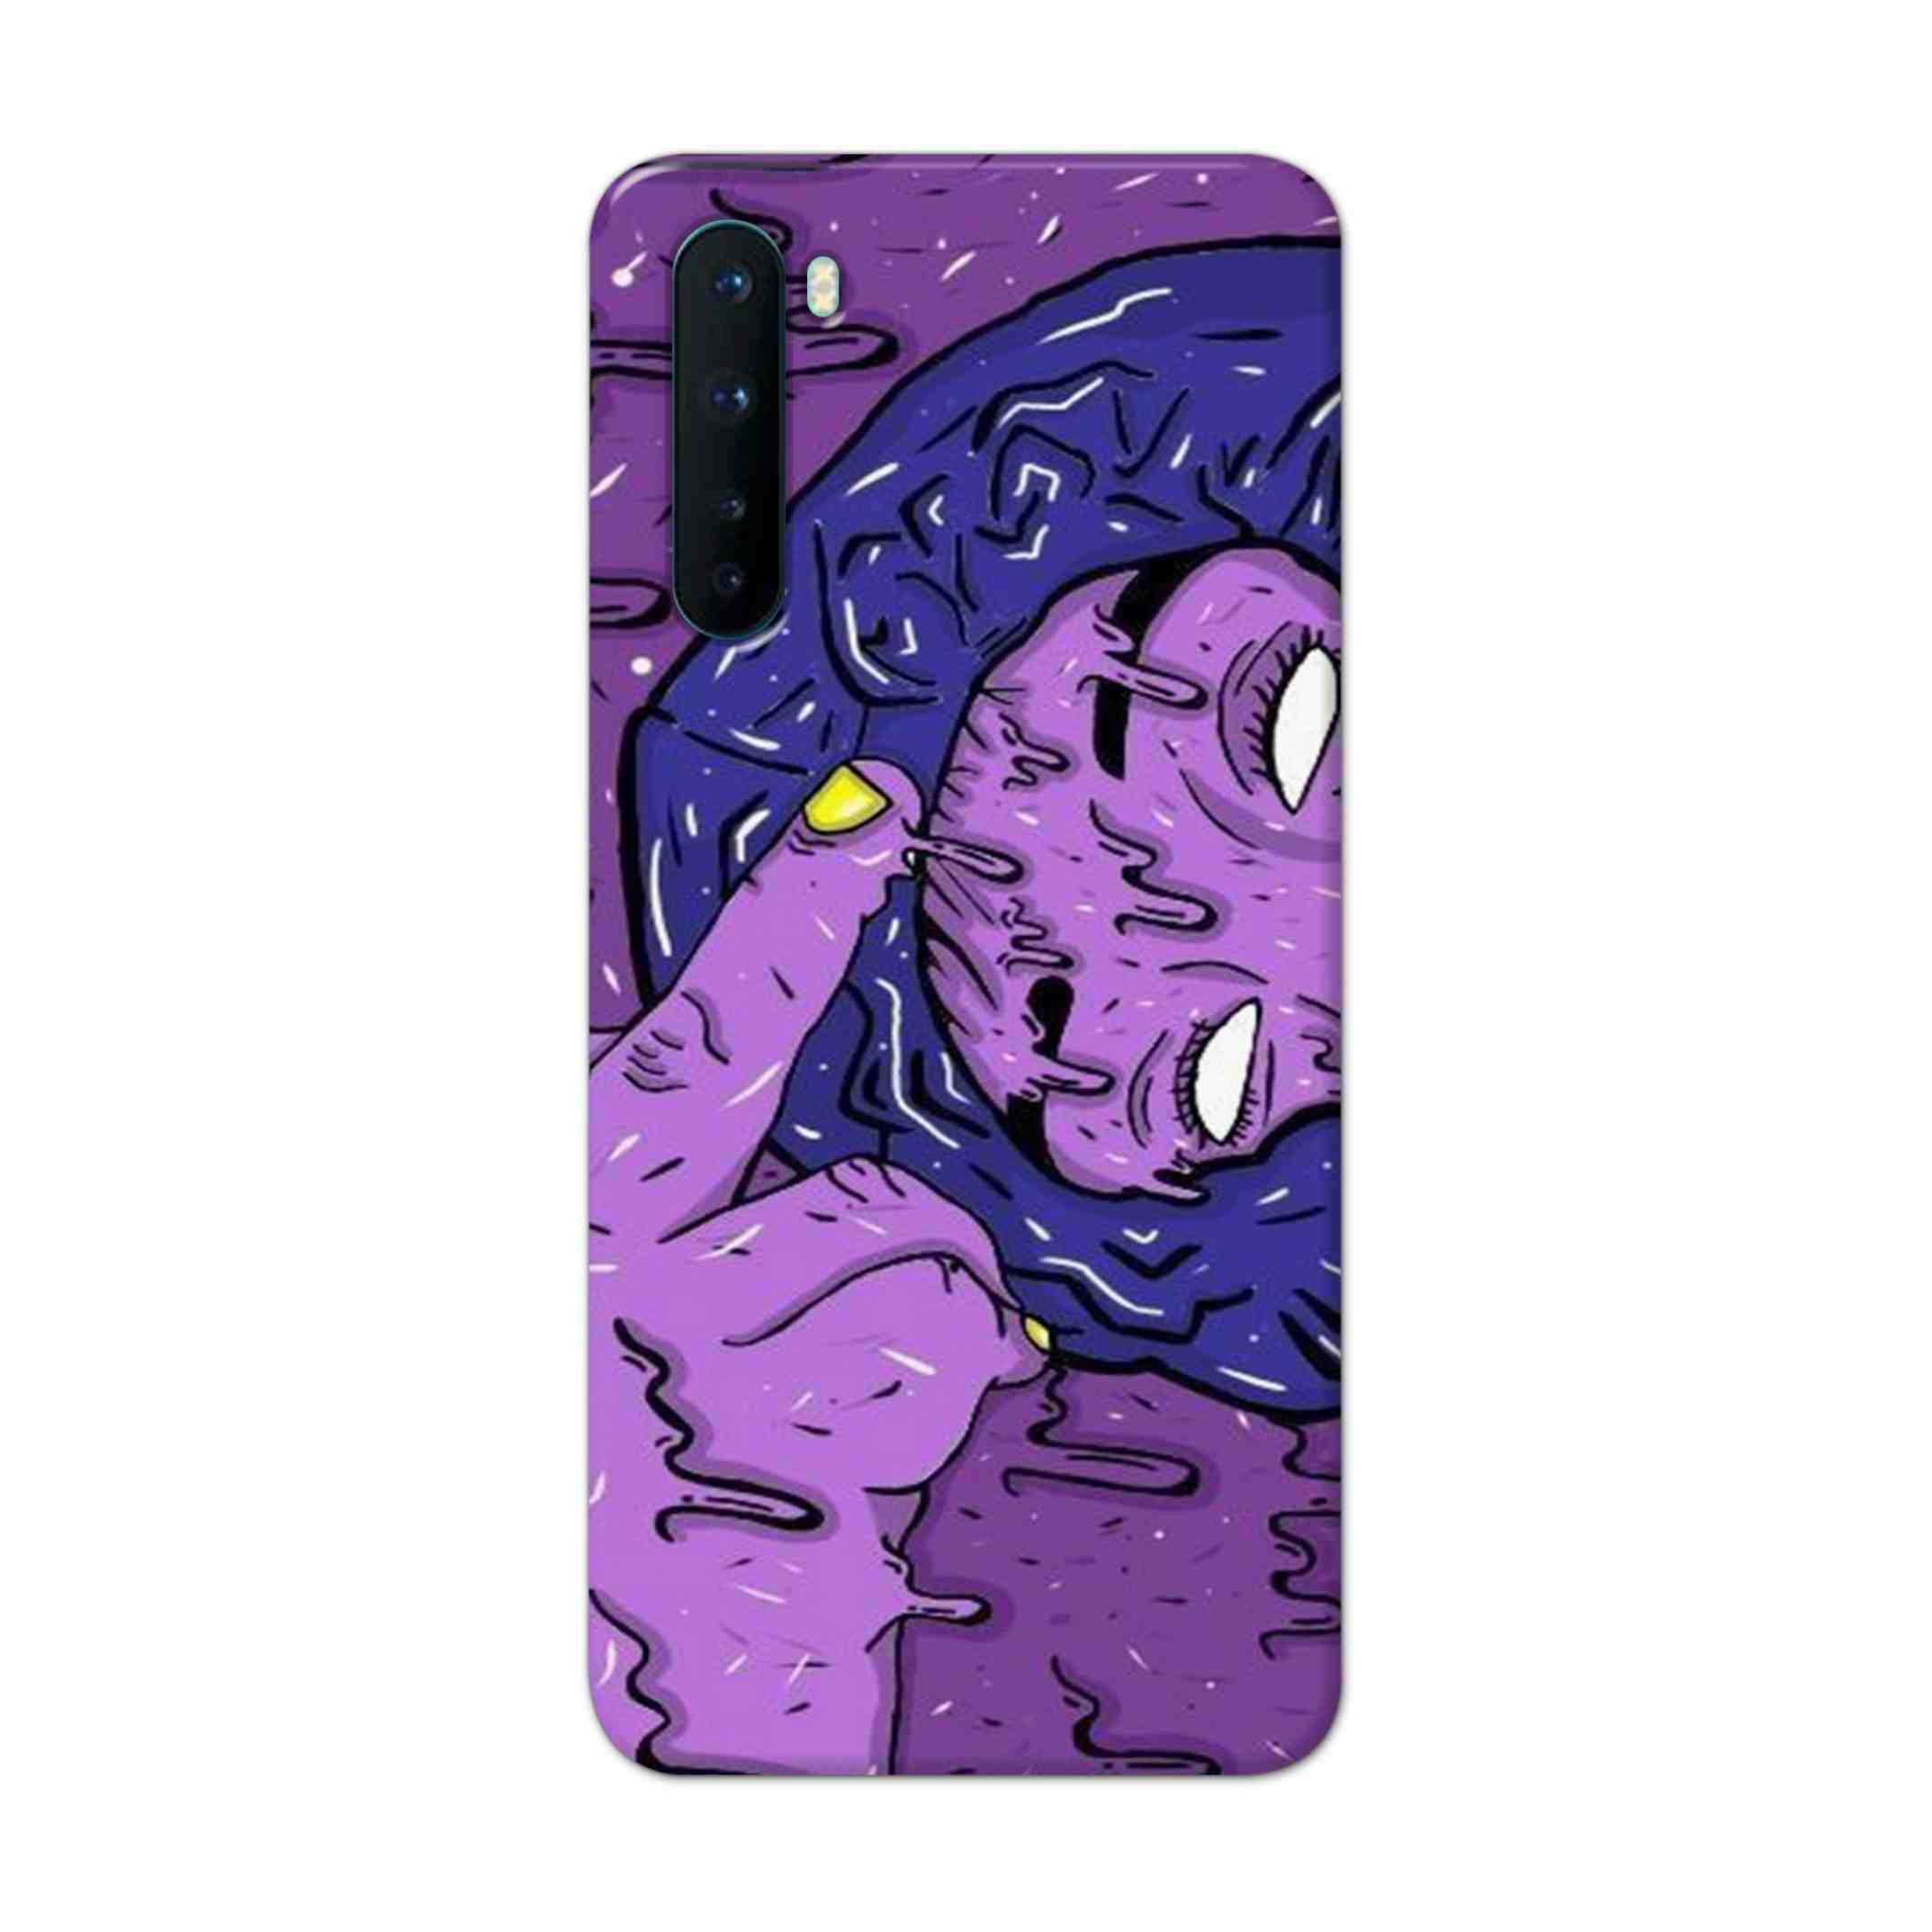 Buy Dashing Art Hard Back Mobile Phone Case Cover For OnePlus Nord Online